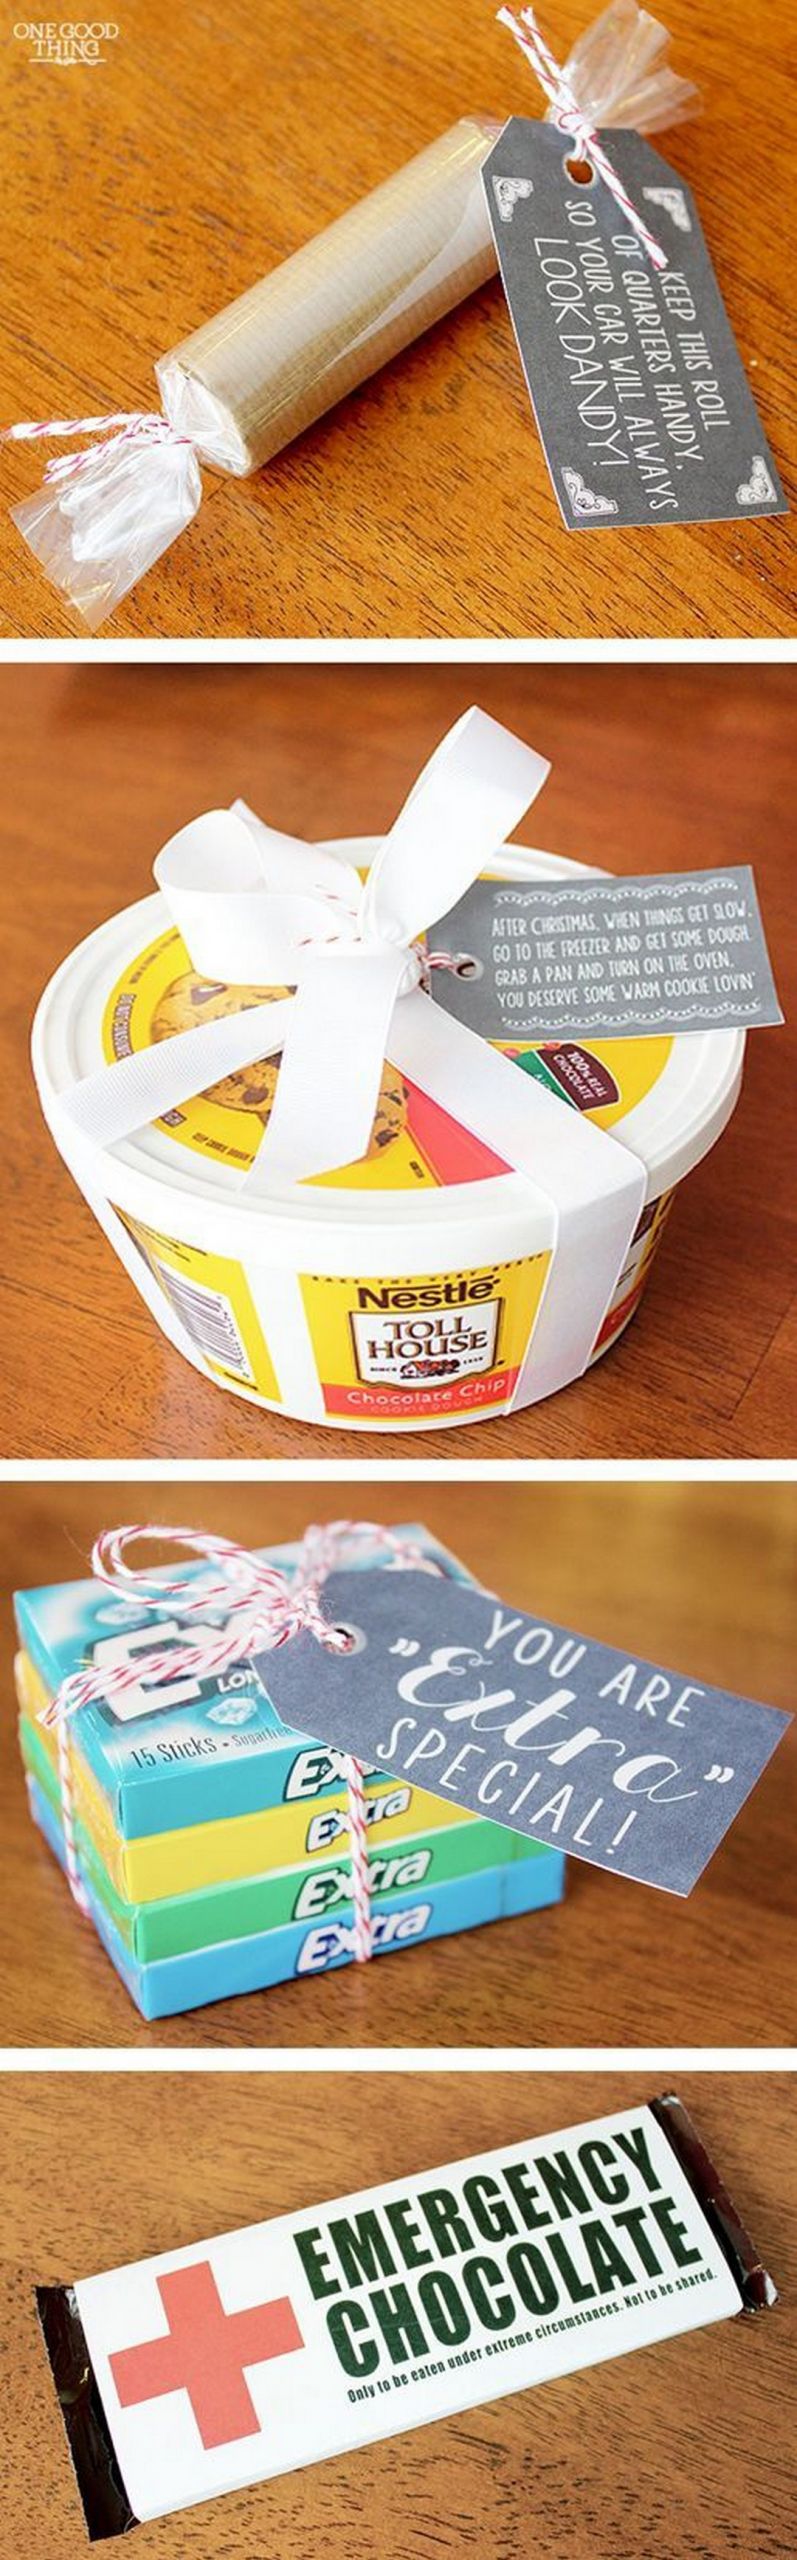 DIY Gifts For Best Friends
 Easy Diy Christmas Gifts For Your Best Friends 5